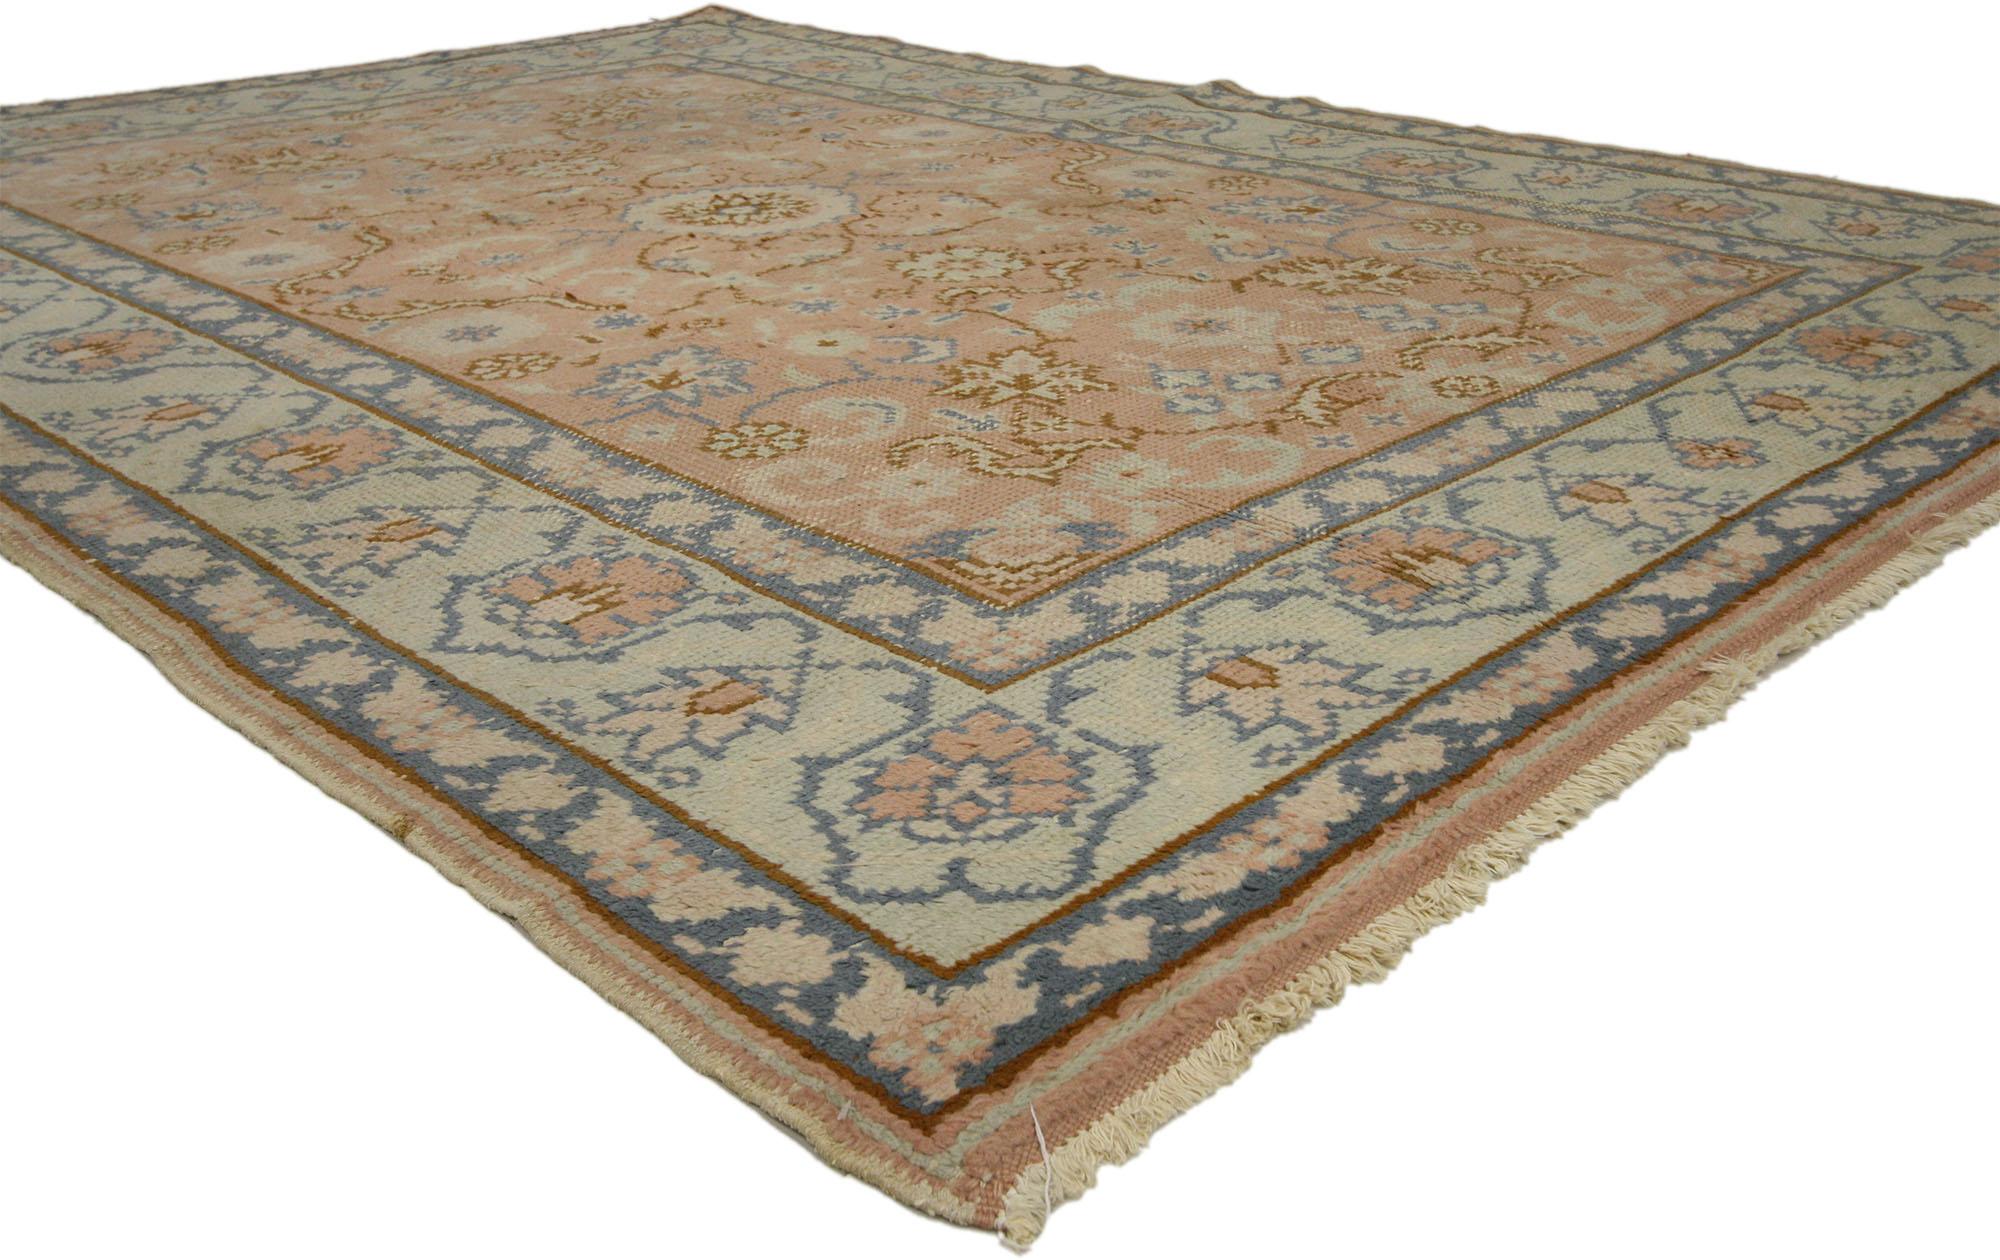 72423, vintage Turkish Oushak rug with Swedish Farmhouse or English Country style. Expressing homegrown charm and hospitality, this hand knotted wool vintage Turkish Oushak rug displays a shabby chic farmhouse style. The intricate designs and